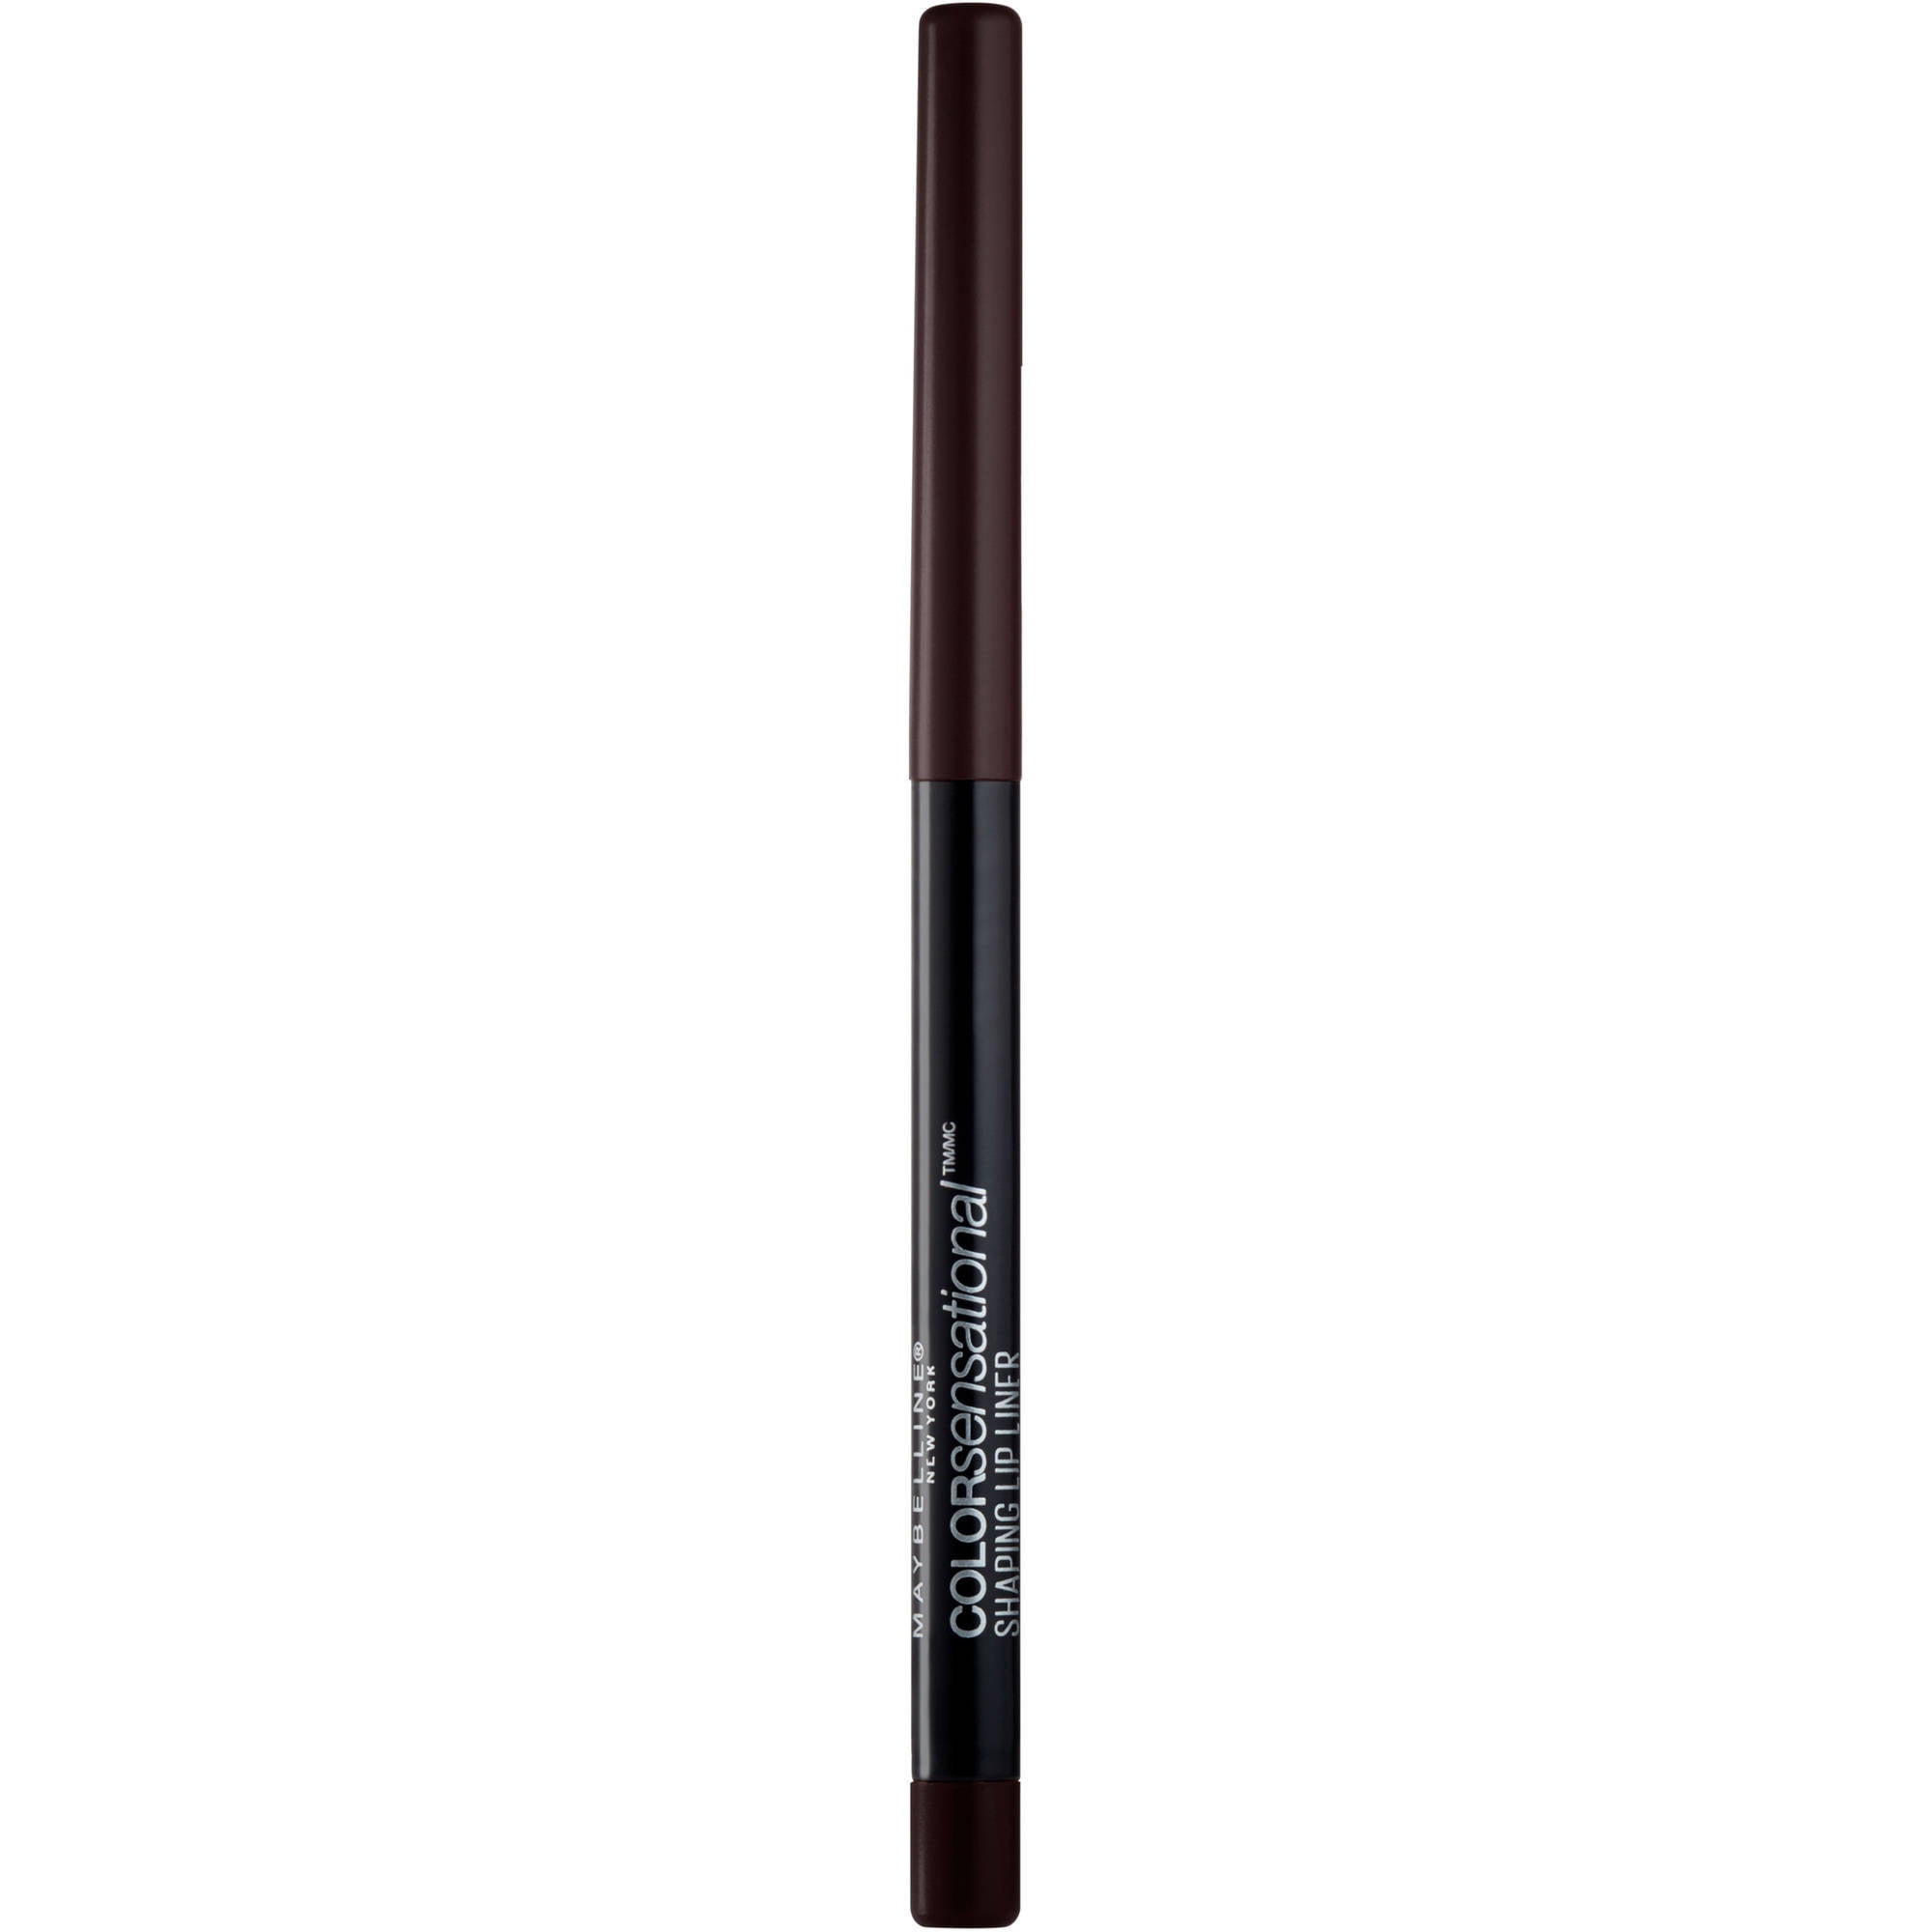 Maybelline Color Sensational Shaping Liner 0.01 oz. Lip Makeup, Chocolate, Raw